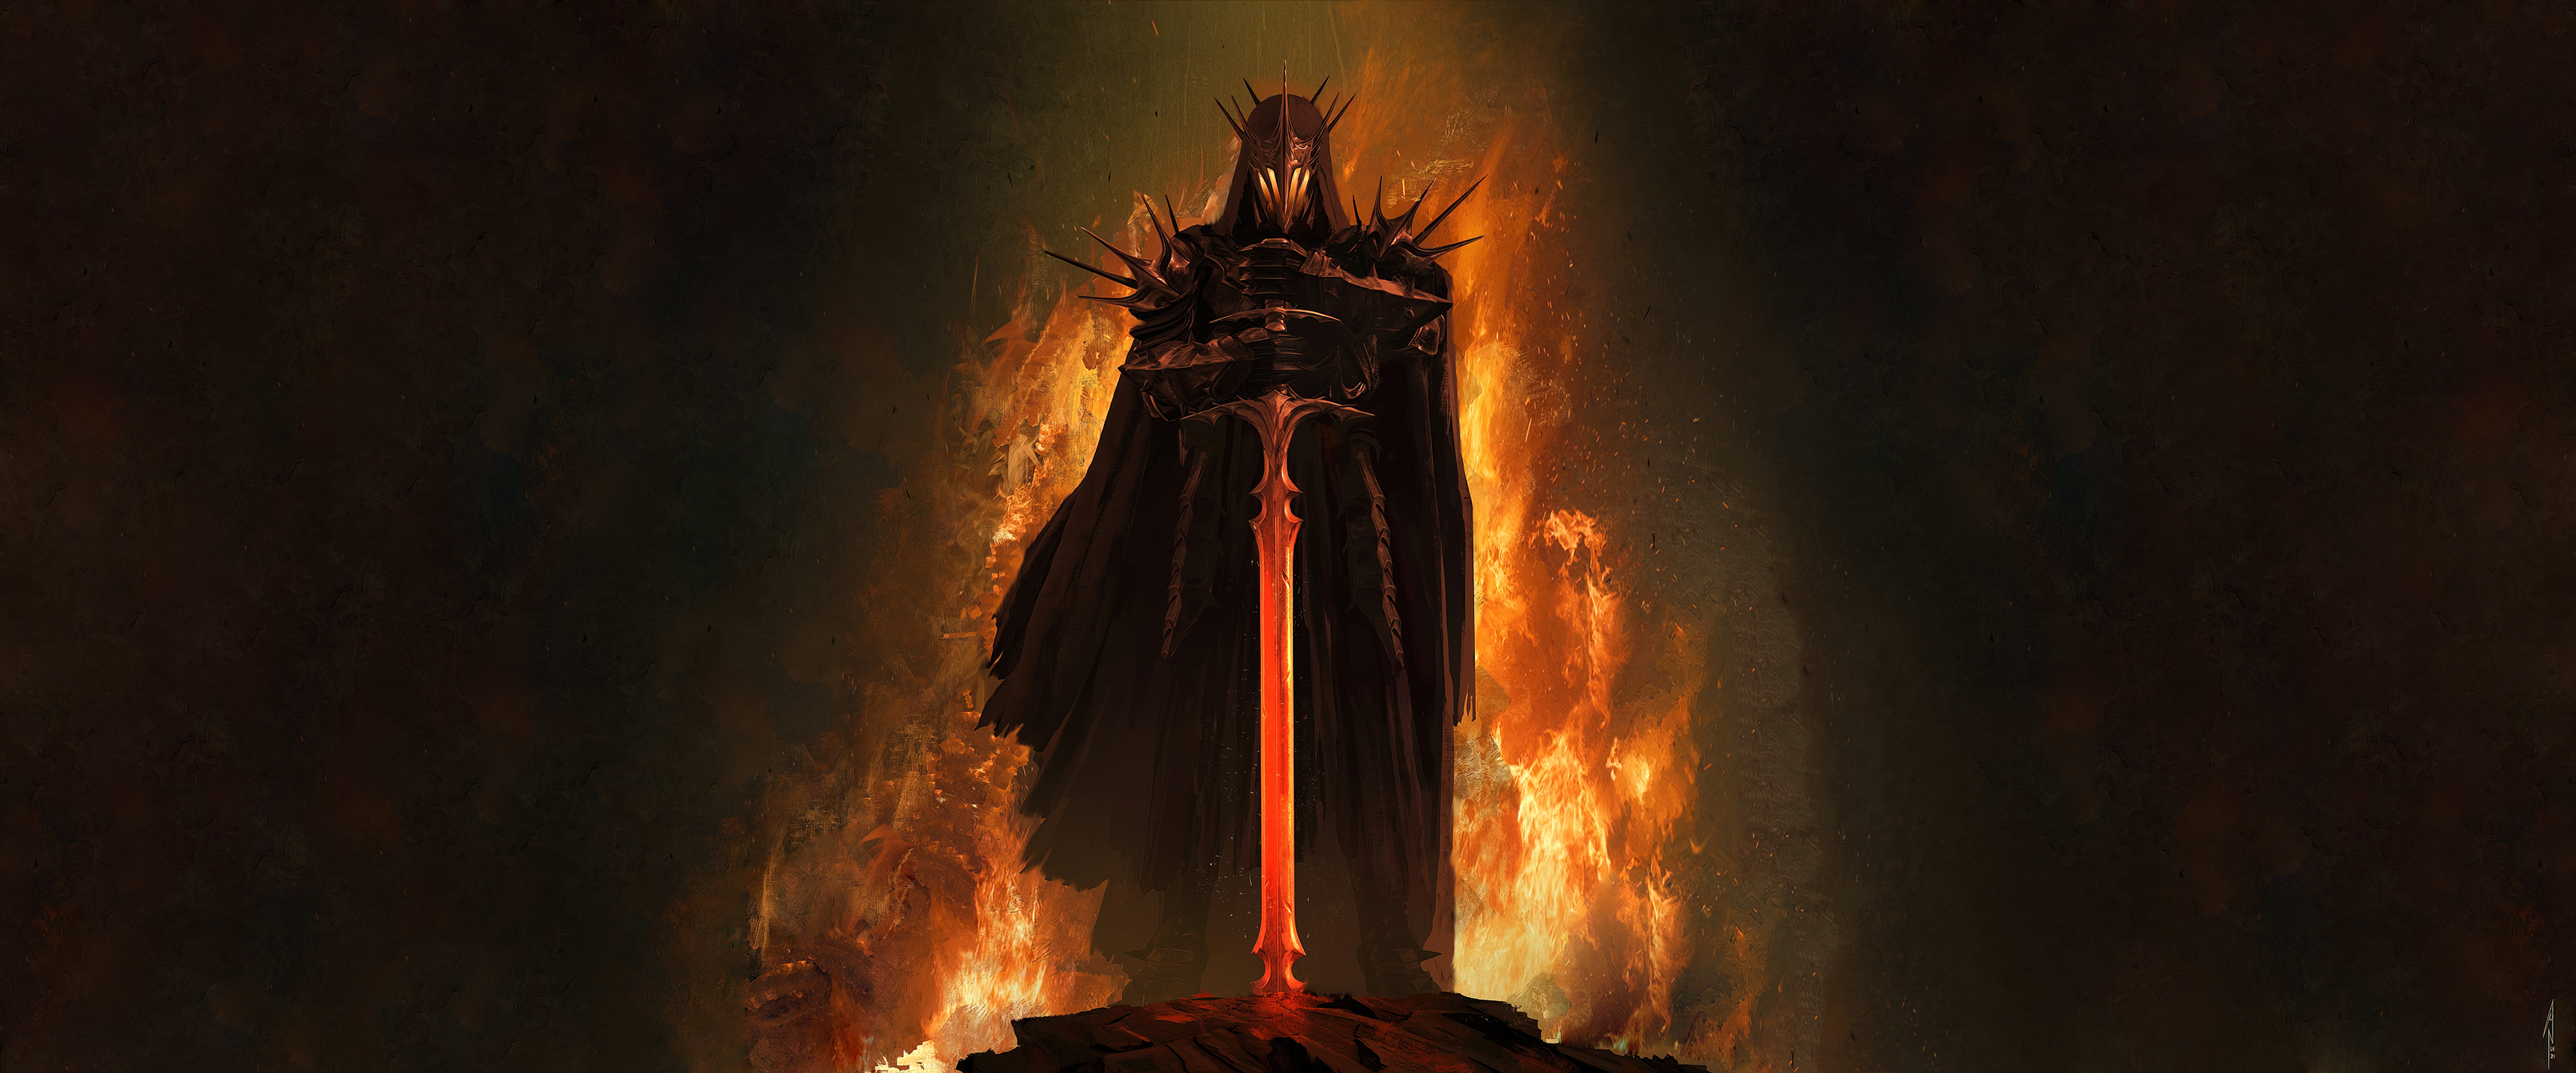 Witch King Of Angmar The Lord Of The Rings Nazgul J R R Tolkien 3840x1600